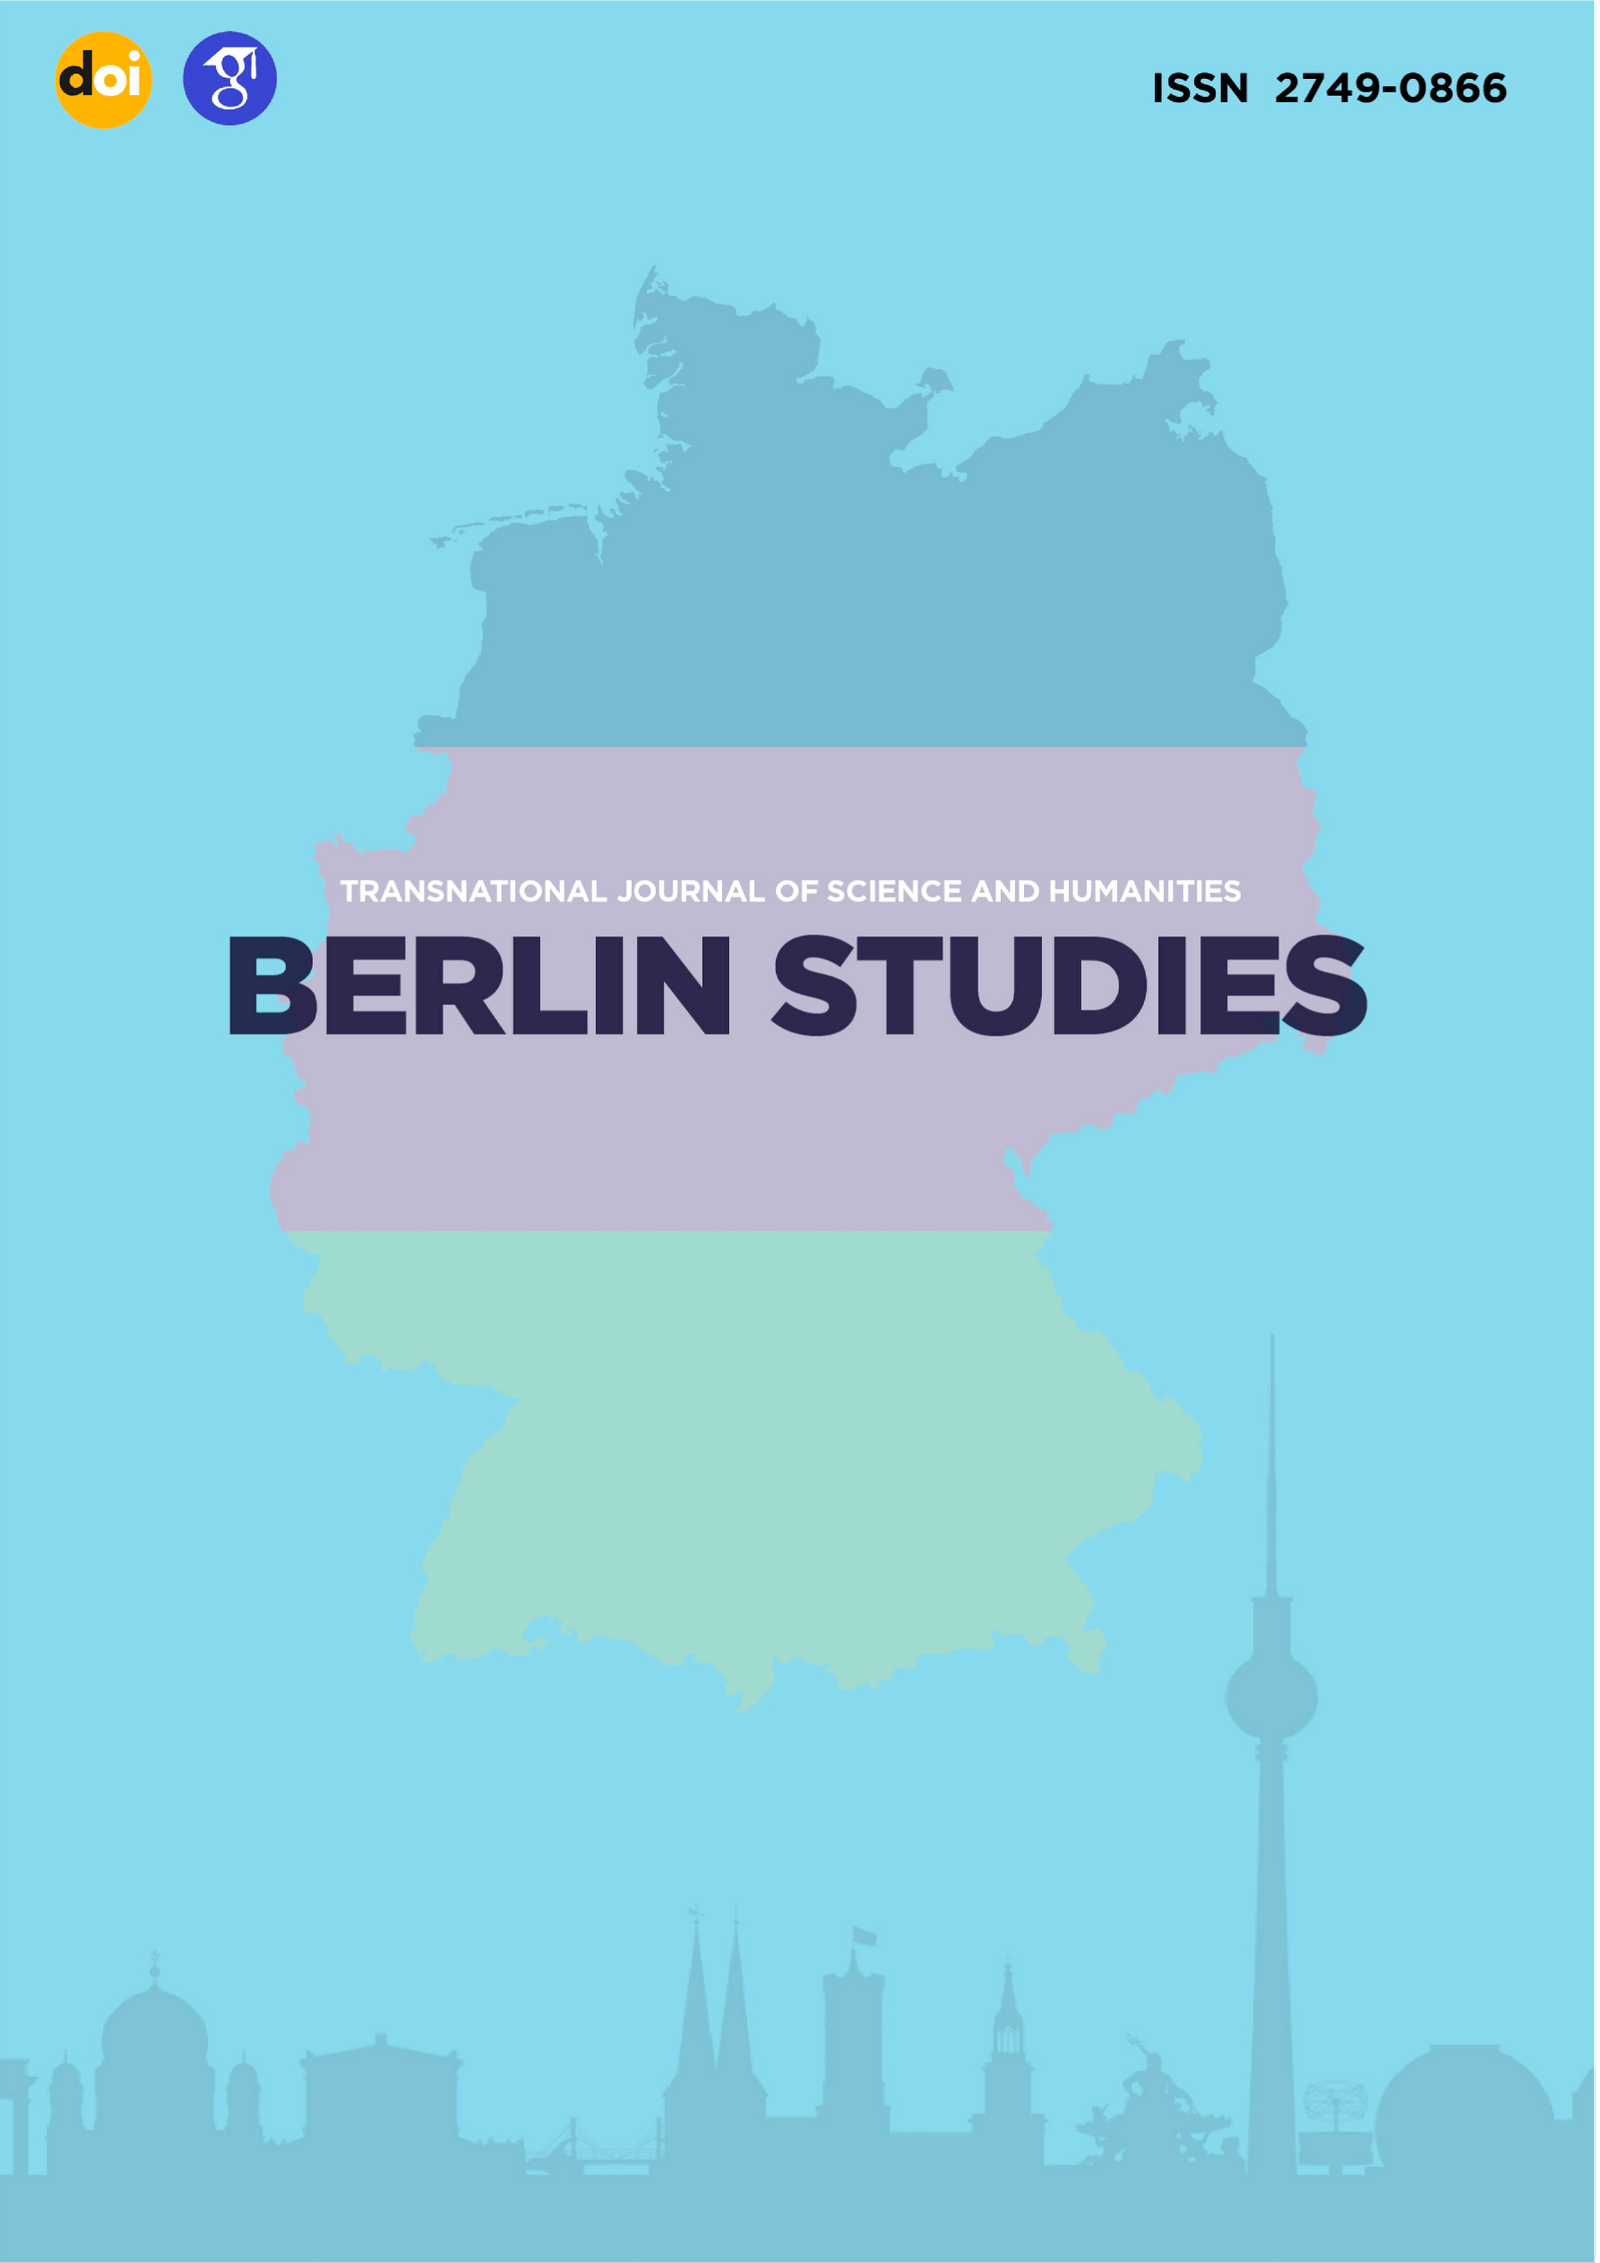 					View Vol. 1 No. 1.6 Philological sciences (2021): Berlin Studies Transnational Journal of Science and Humanities
				